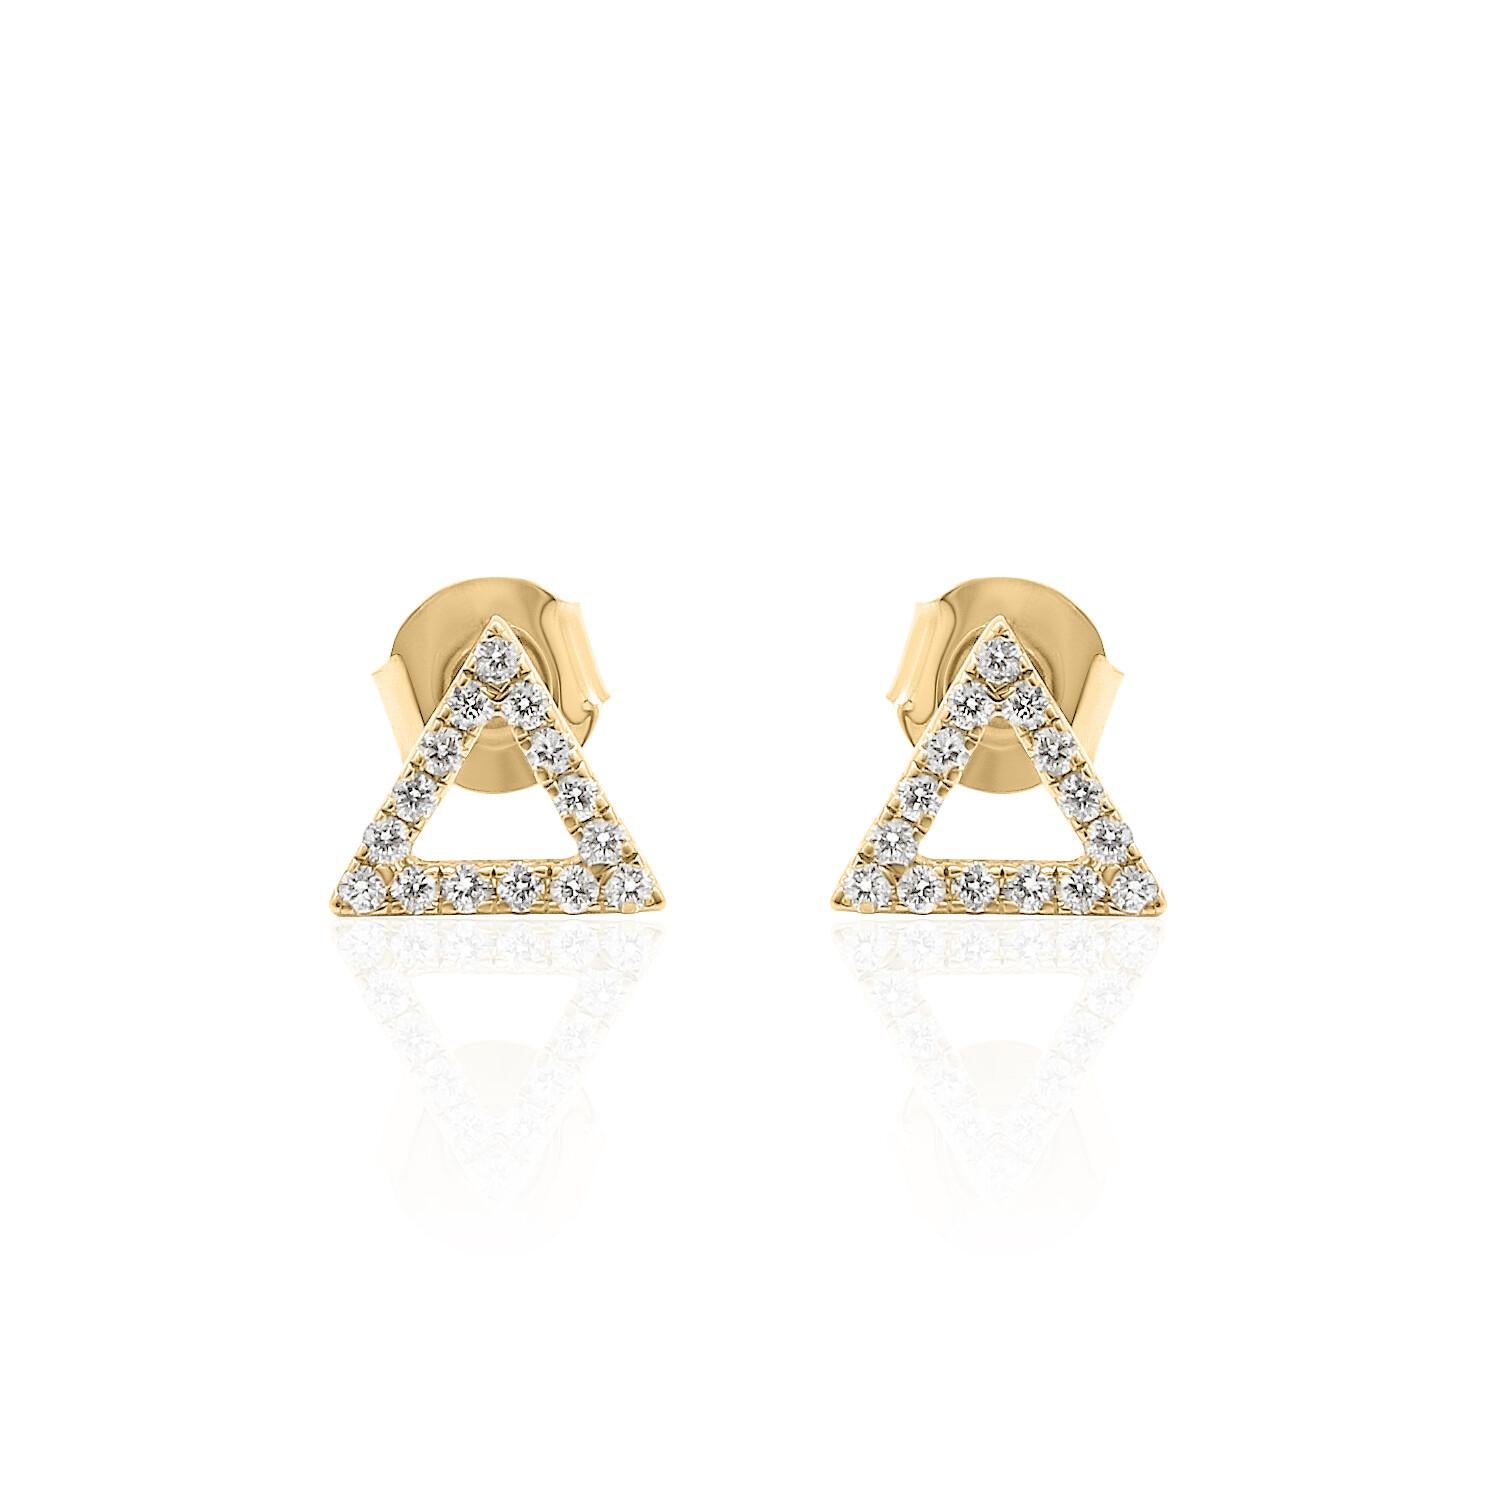 Contemporary Triangle Diamond Earrings 14K, White, Yellow, and Rose Gold